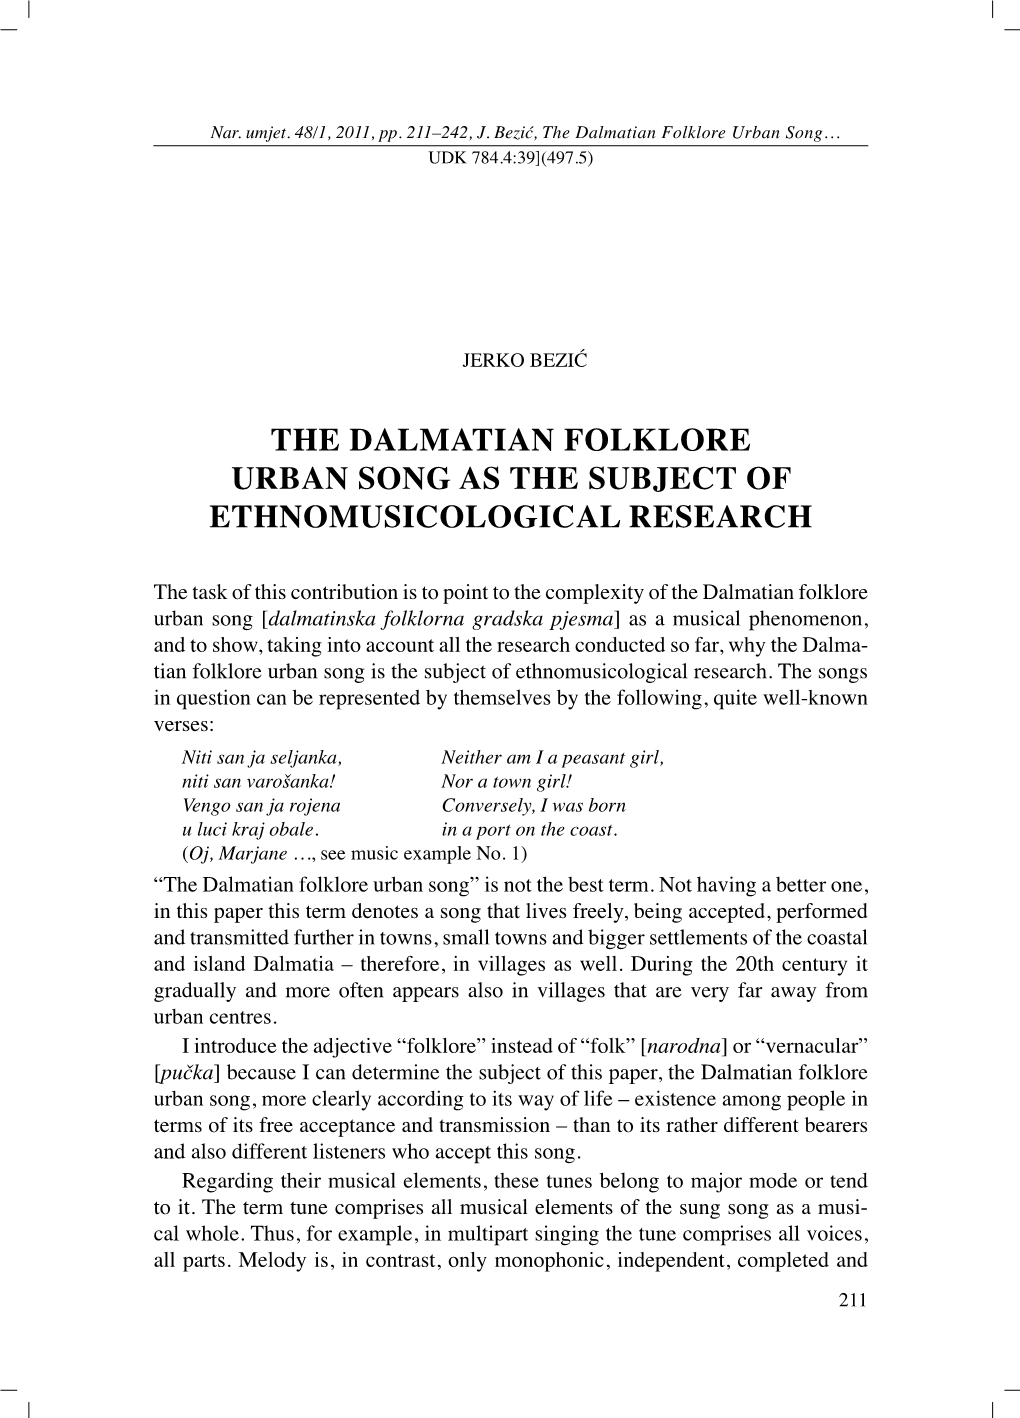 The Dalmatian Folklore Urban Song As the Subject of Ethnomusicological Research